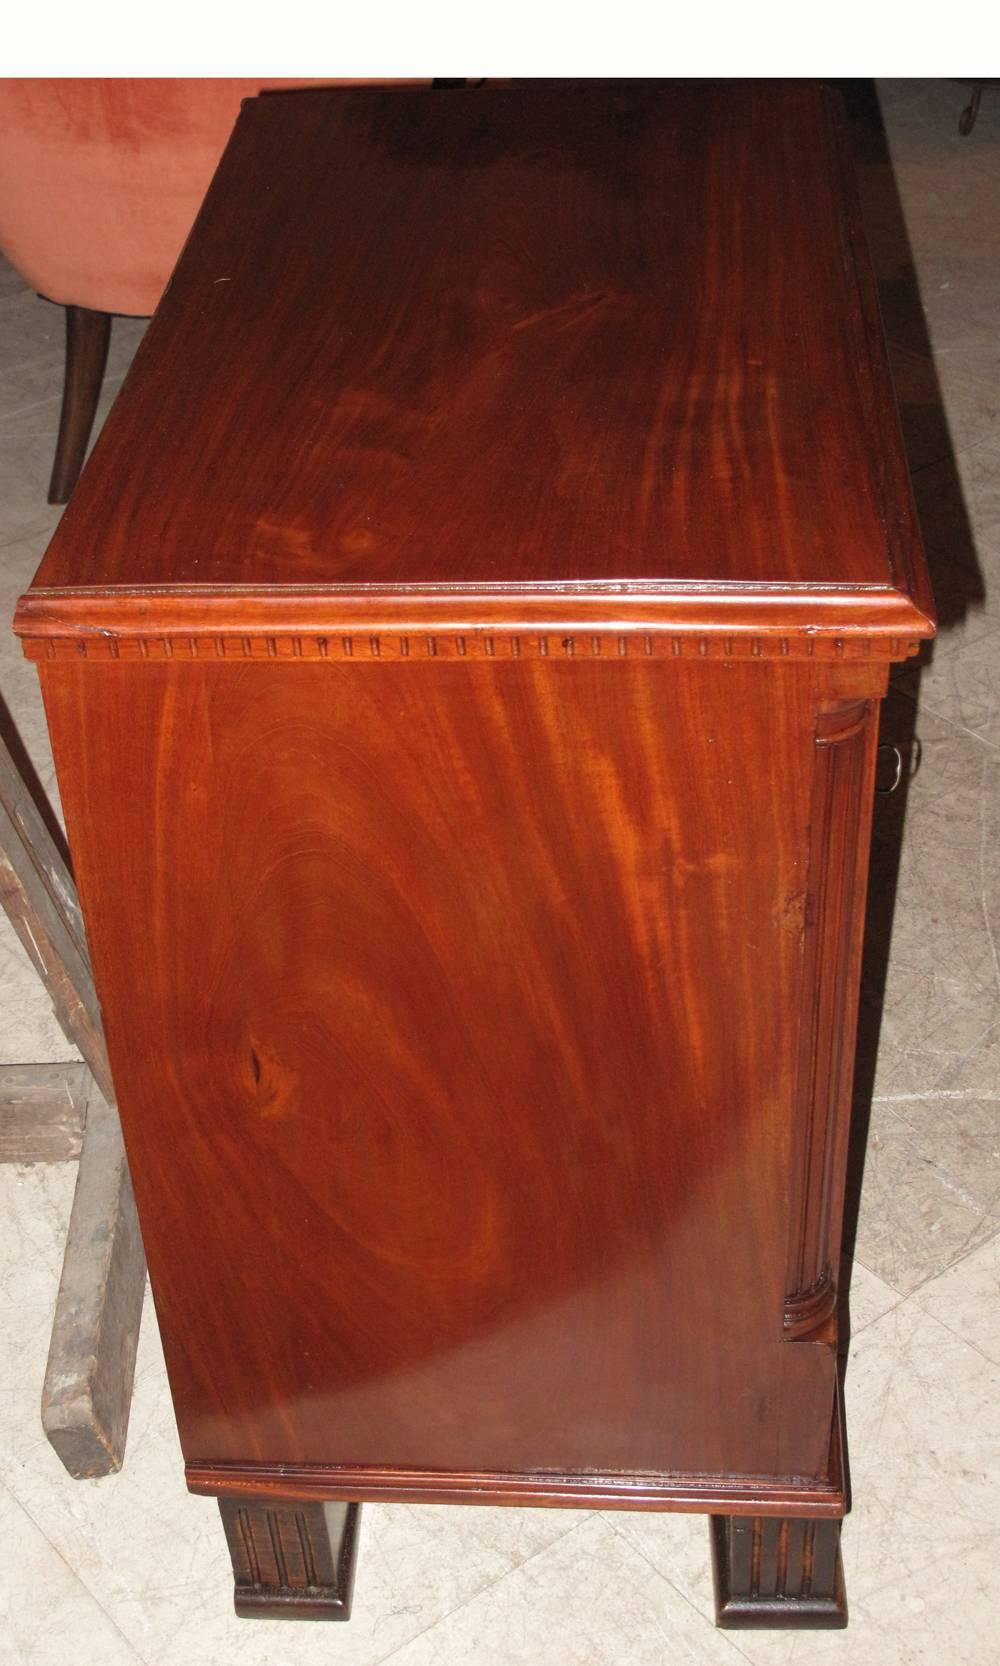 A late 18th century Danish chest of drawers of rich brown figured mahogany the molded top over a dentil molding over three drawers, the drawers flanked by reeded quarter columns on each side above a molded base raised on square column feet. A good